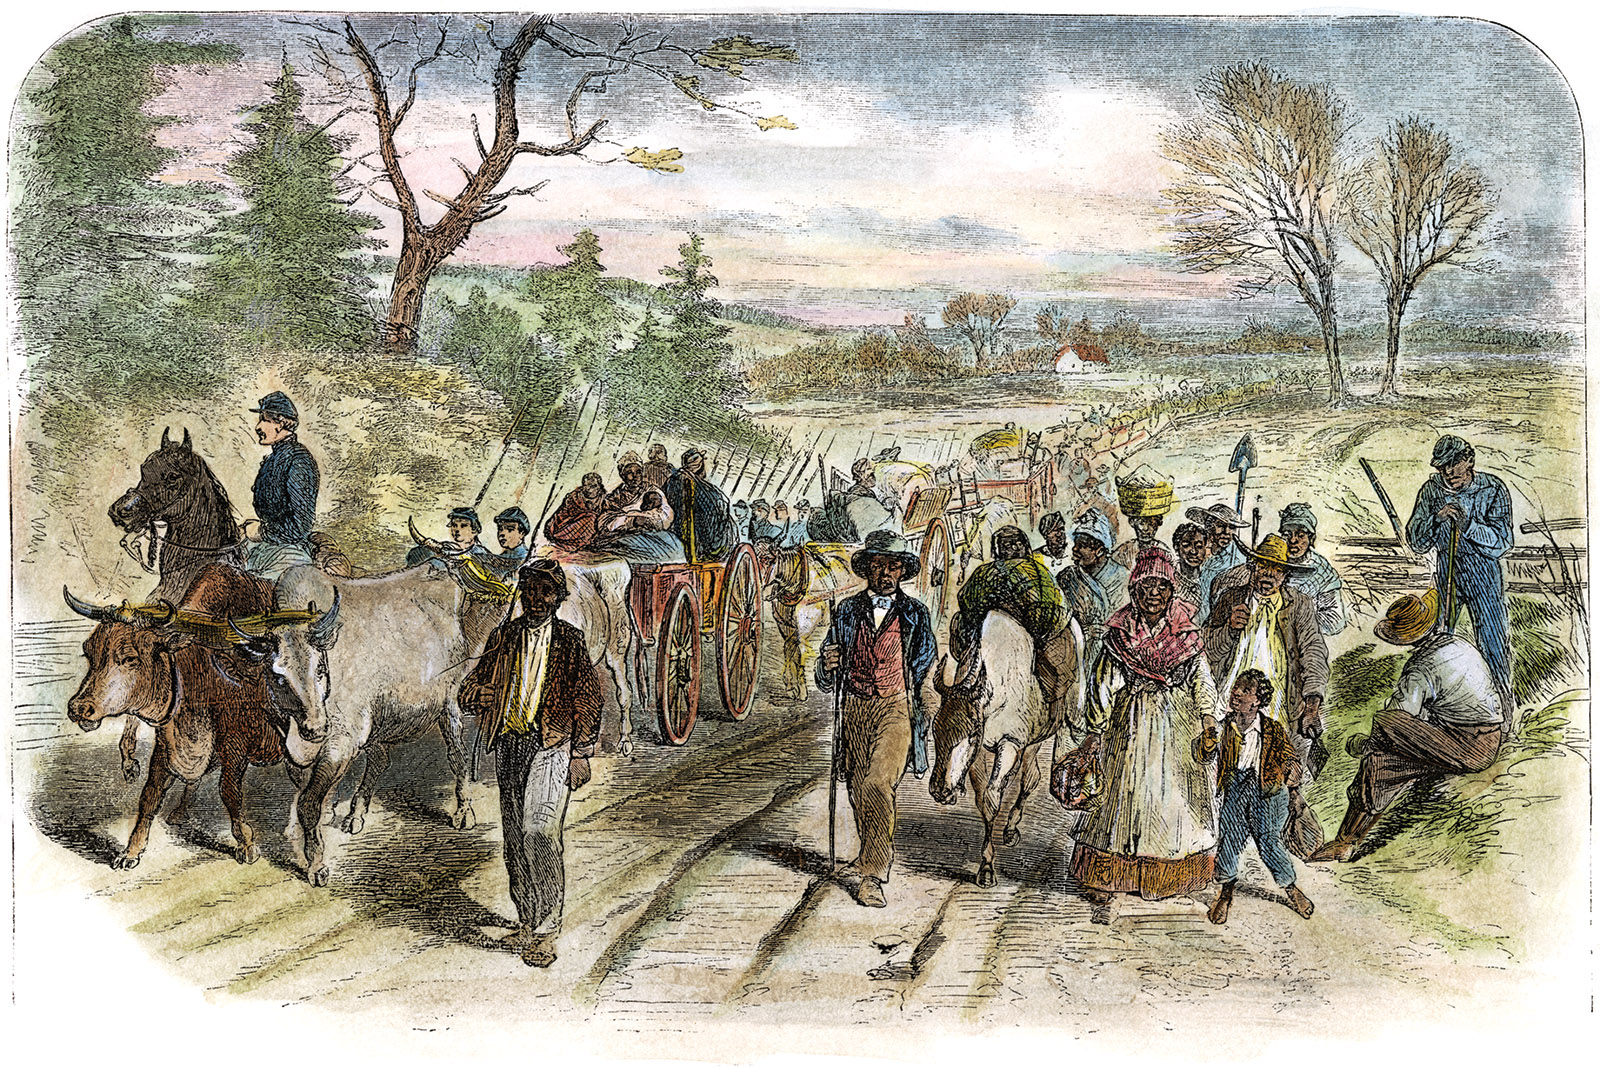 An engraving of freed slaves arriving at Union lines, New Bern, North Carolina, 1863